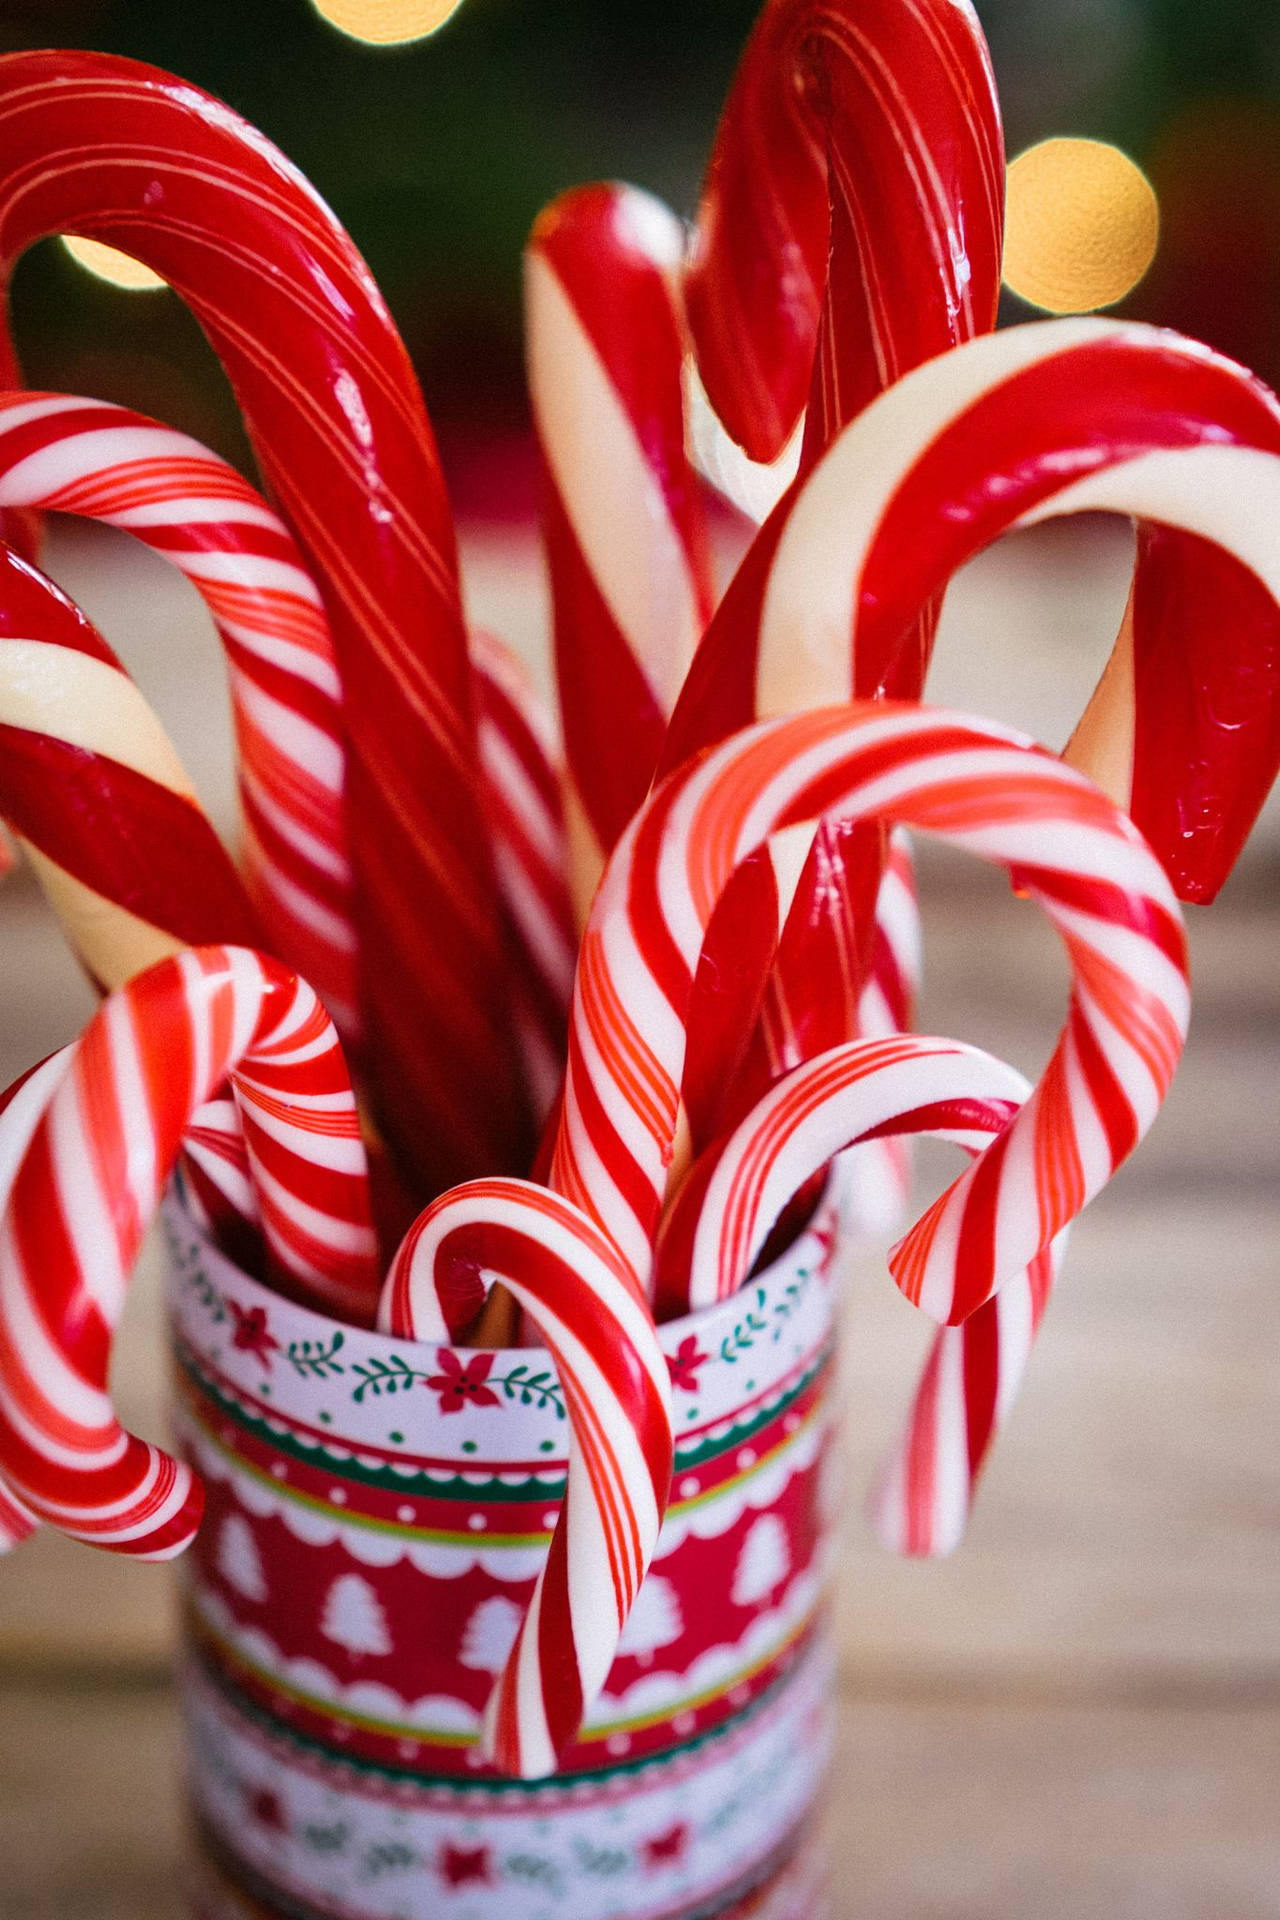 Candy Canes In Mug